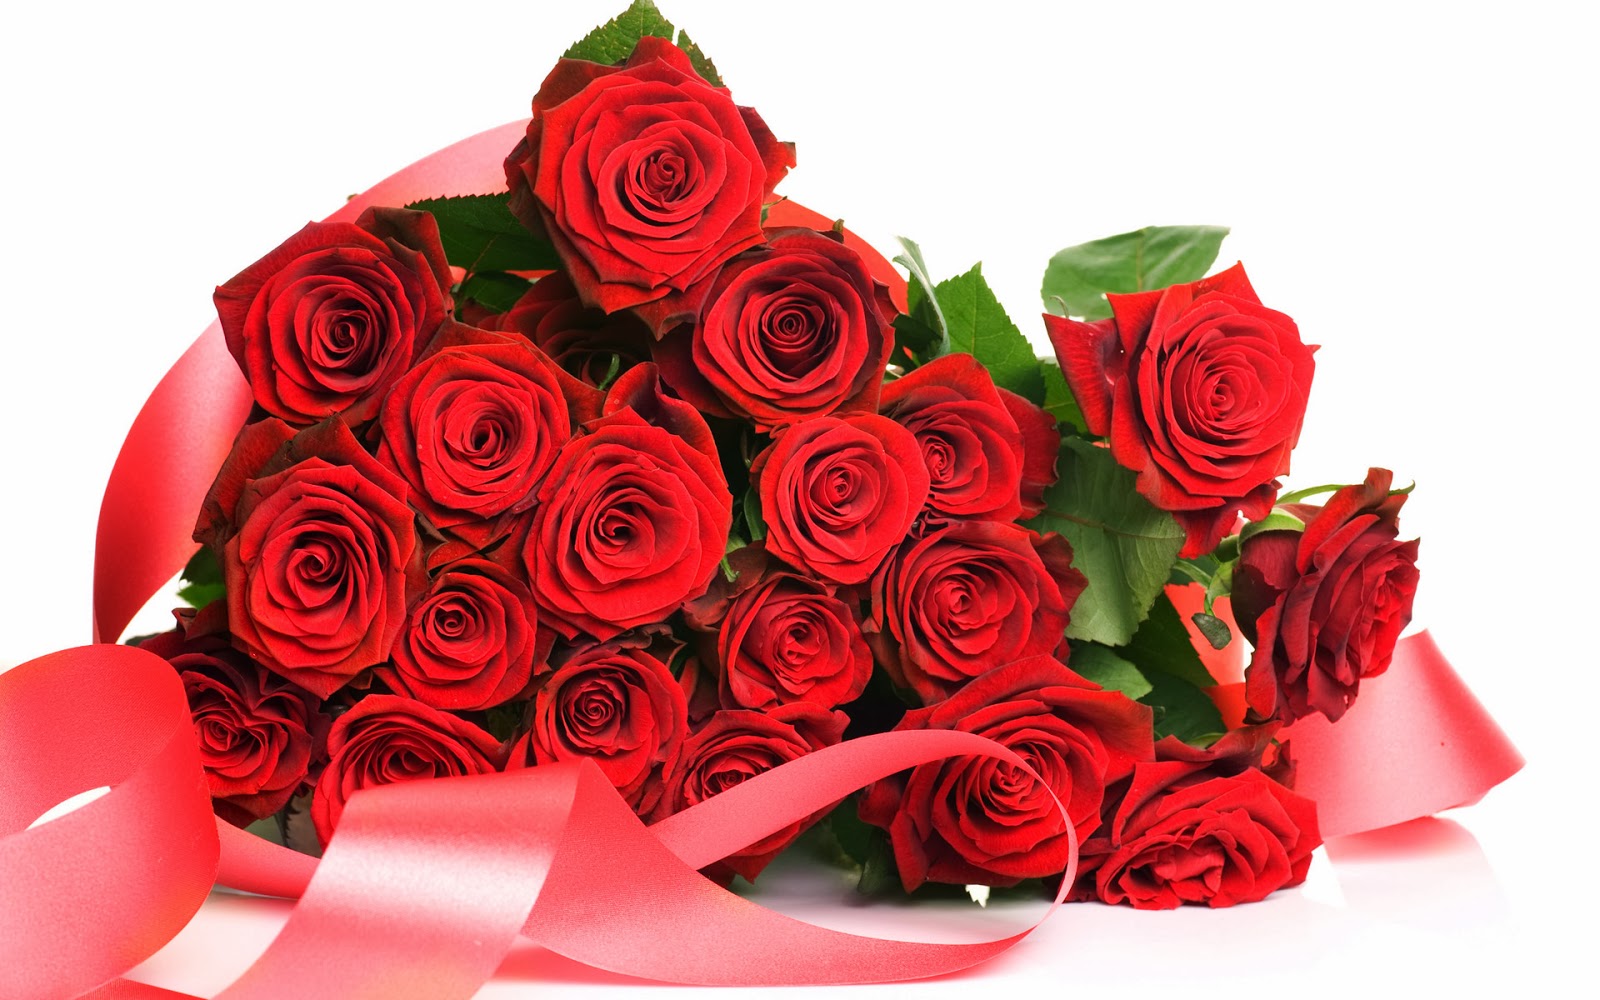  Red  Rose  HD  Flowers  Wallpapers  Flowers 